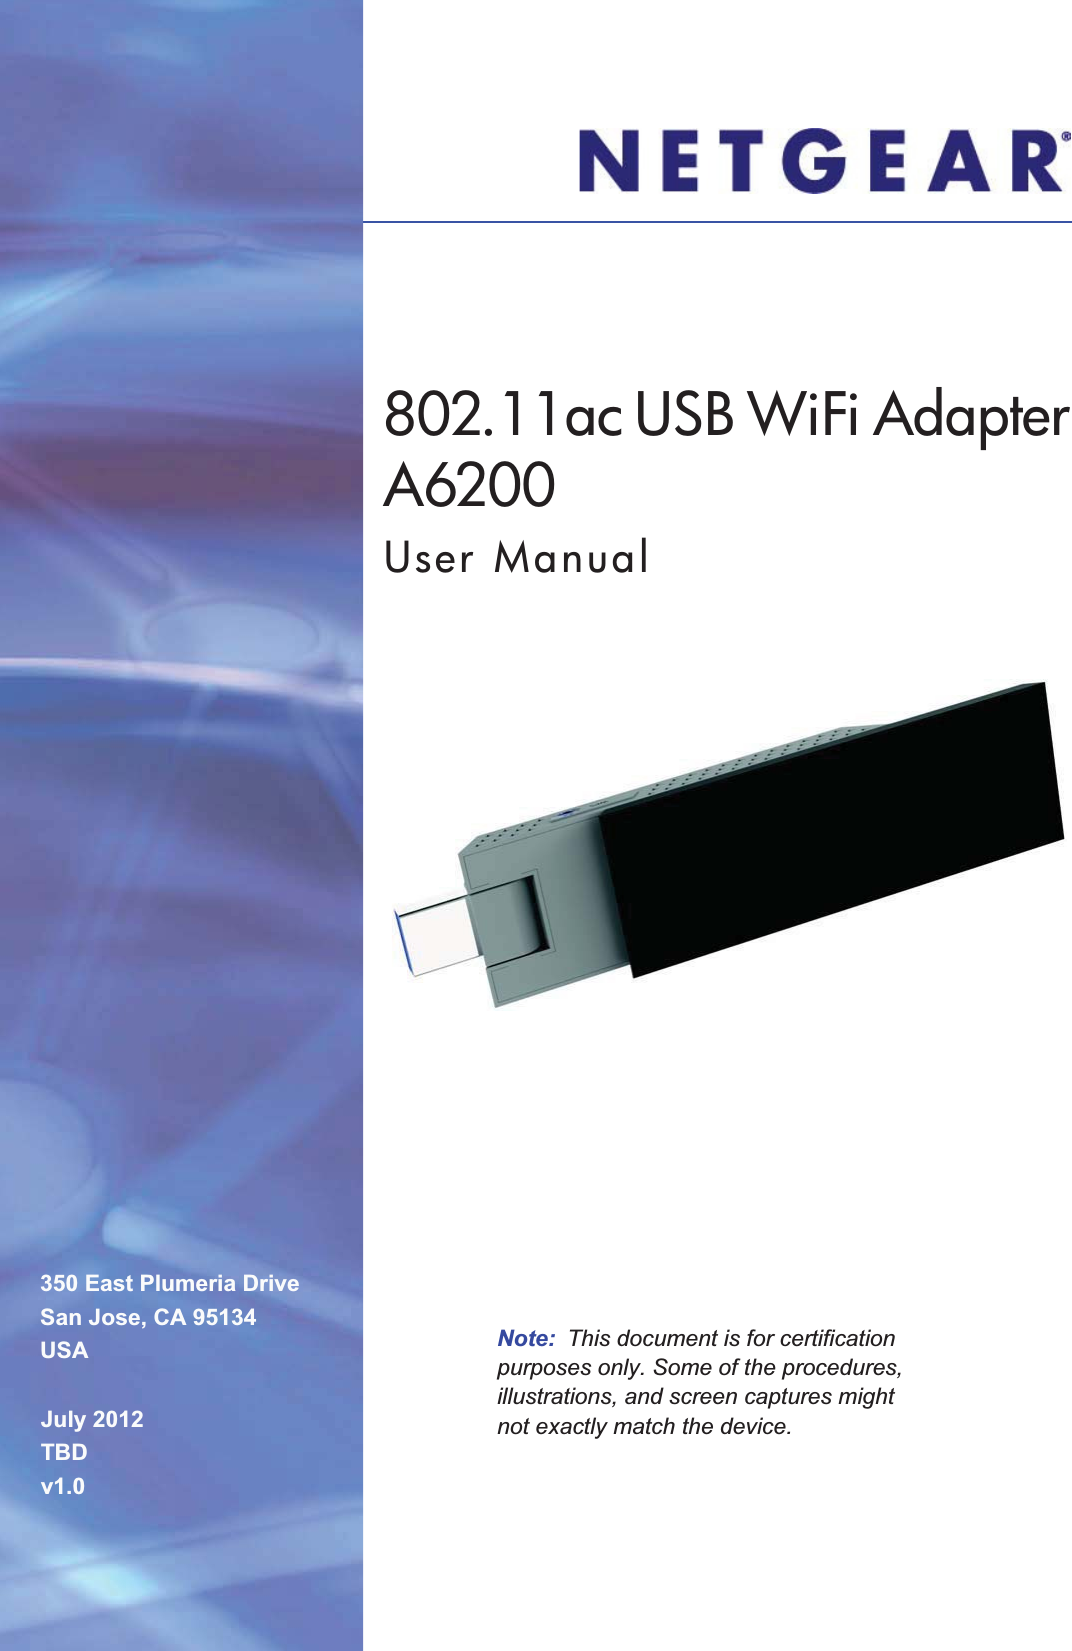 350 East Plumeria DriveSan Jose, CA 95134USAJuly 2012TBDv1.0802.11ac USB WiFi Adapter A6200User ManualNote:  This document is for certification purposes only. Some of the procedures, illustrations, and screen captures might not exactly match the device.